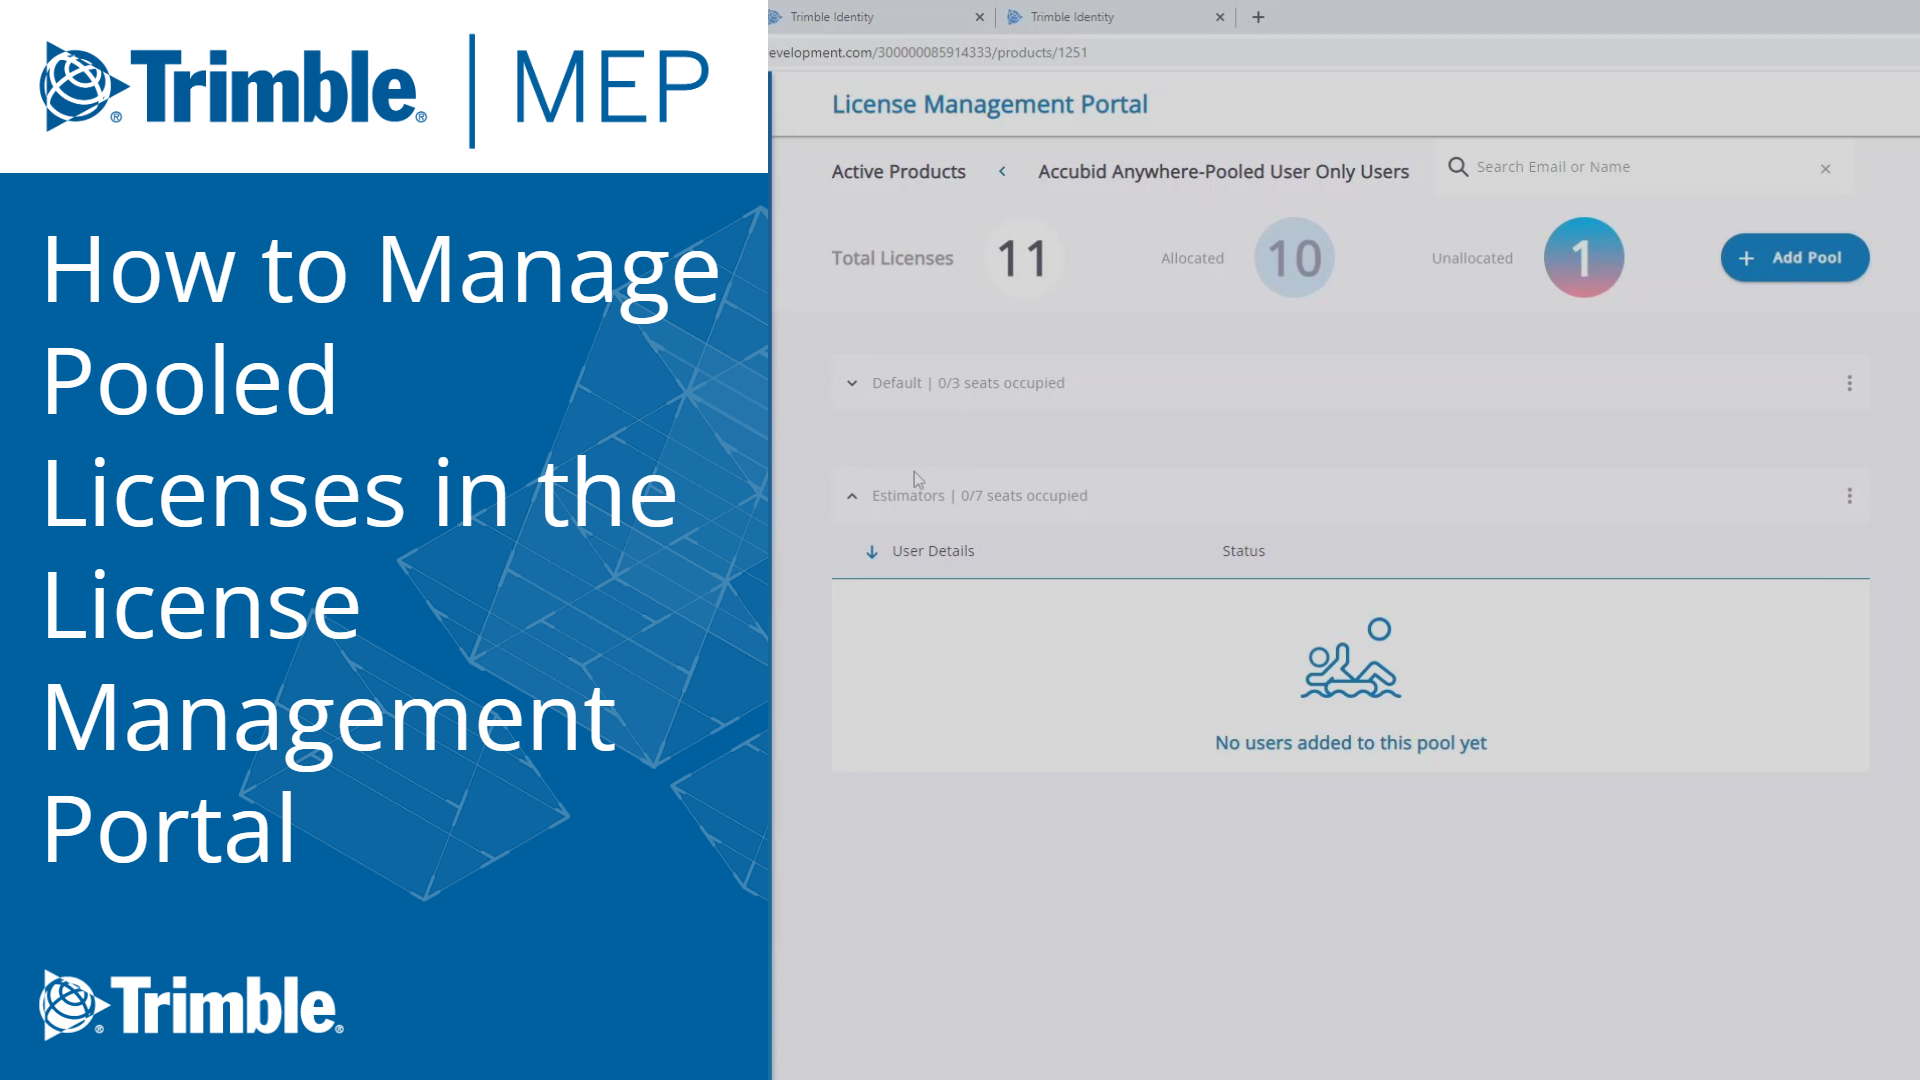 How to Manage Pooled Licenses in the License Management Portal